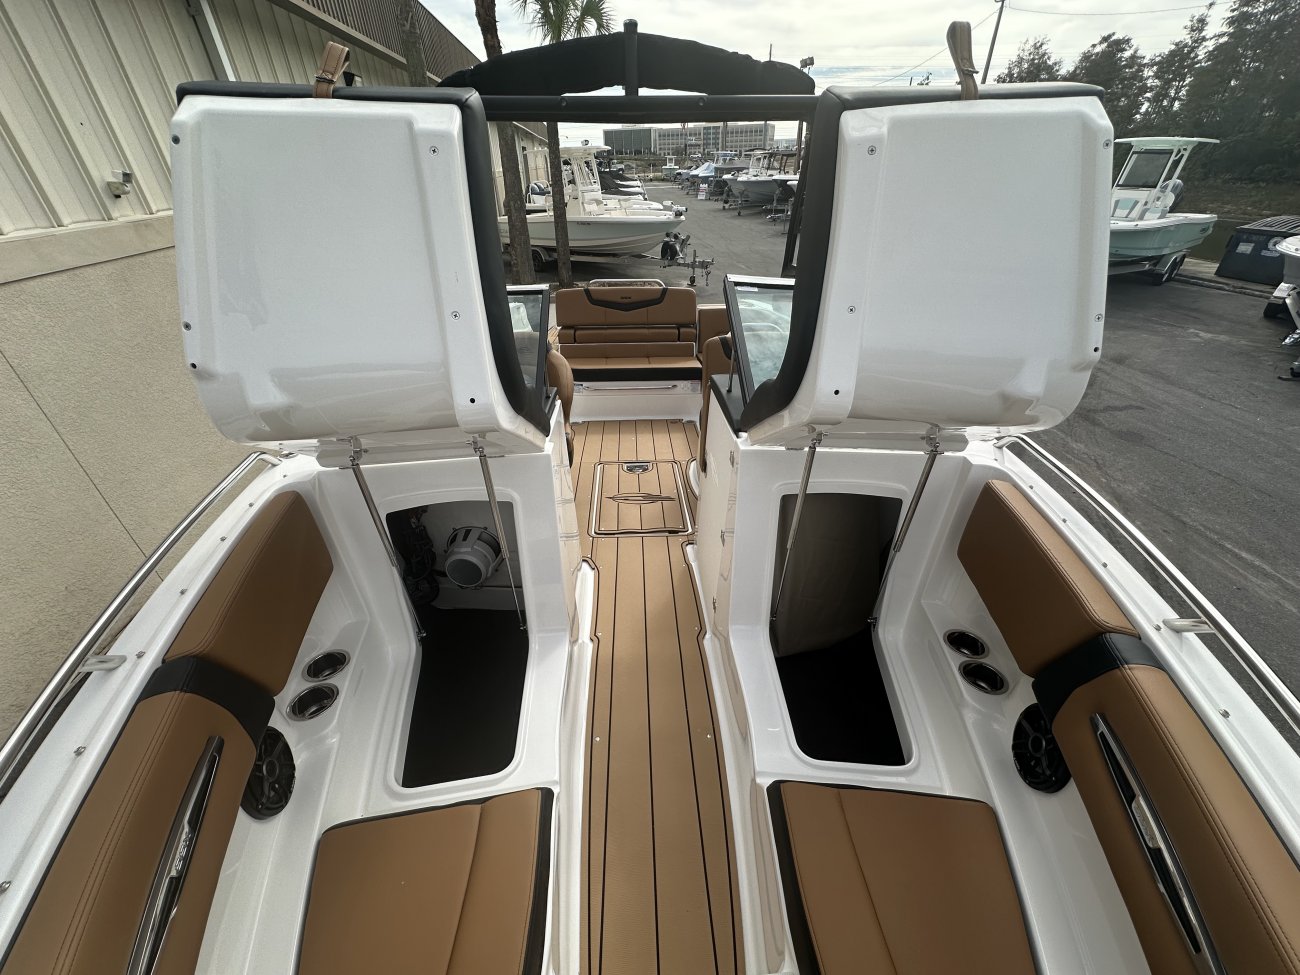 A dual console boat is typically one that was designed for salt water fishing and has the console split around a center walk thru to the bow.  The helm is usually starboard while there is passenger seating to port.